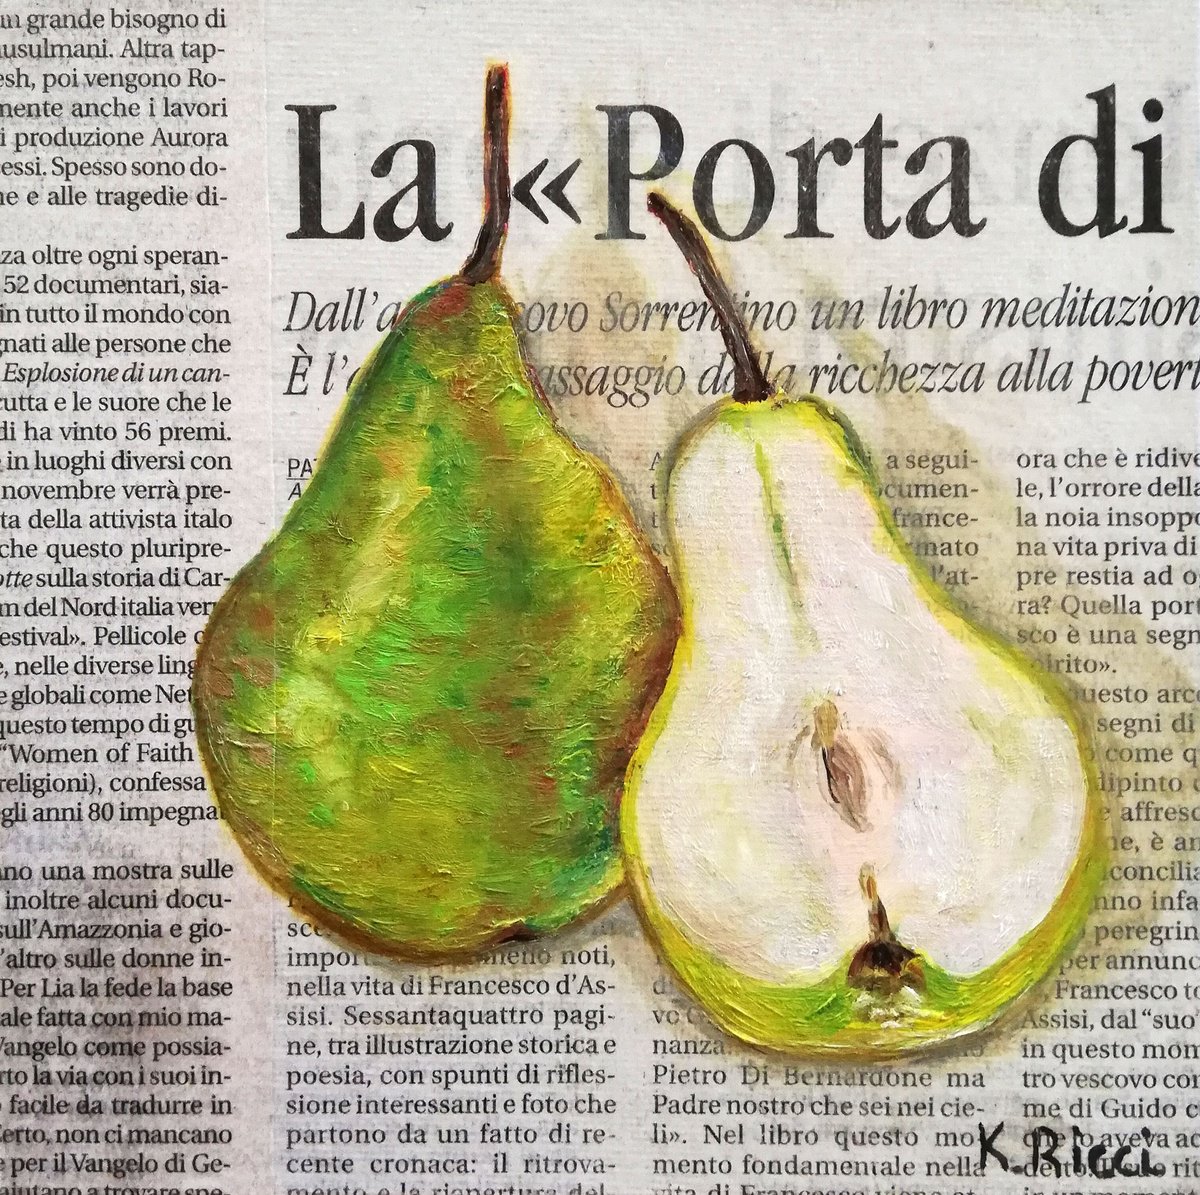 Pear on Newspaper Original Oil on Canvas Board Painting 6 by 6 inches (15x15 cm) by Katia Ricci